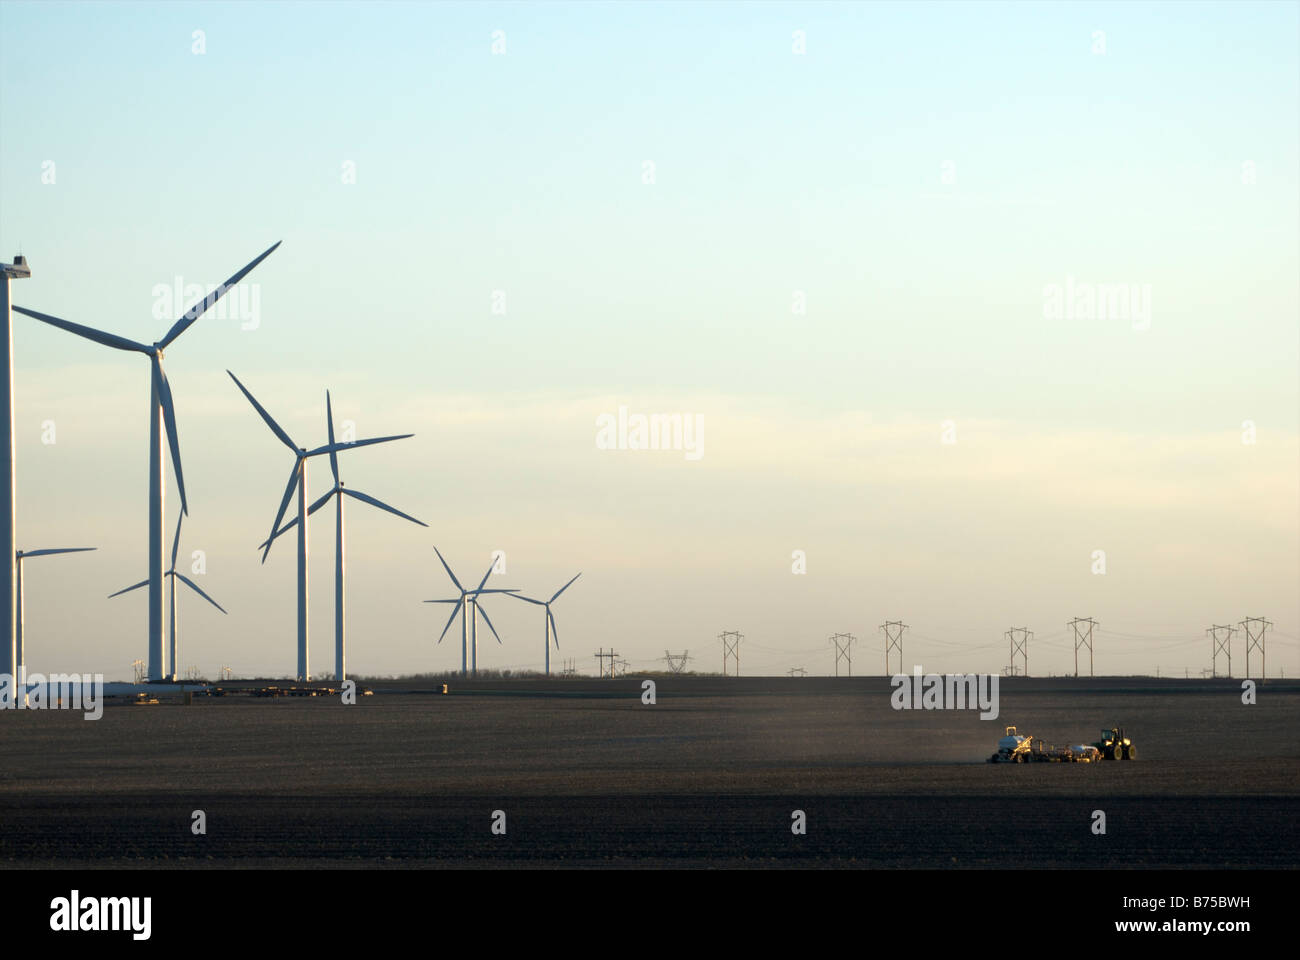 Extreme low angle upper portion of wind turbine Stock Photo